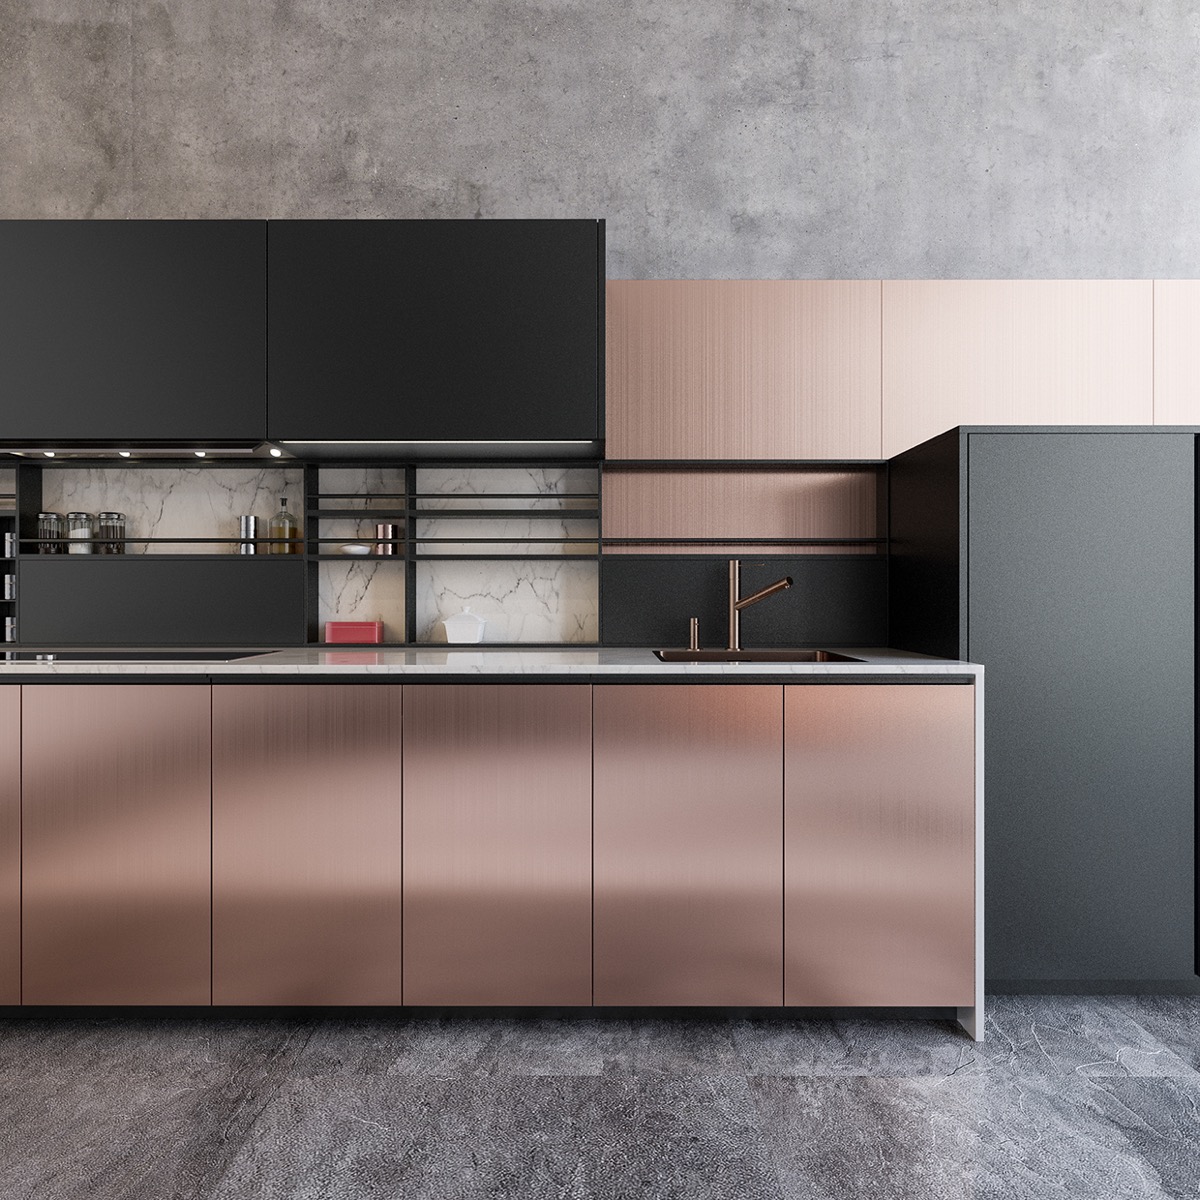 A modern kitchen featuring black and rose gold cabinets, showcasing the latest kitchen design trends.